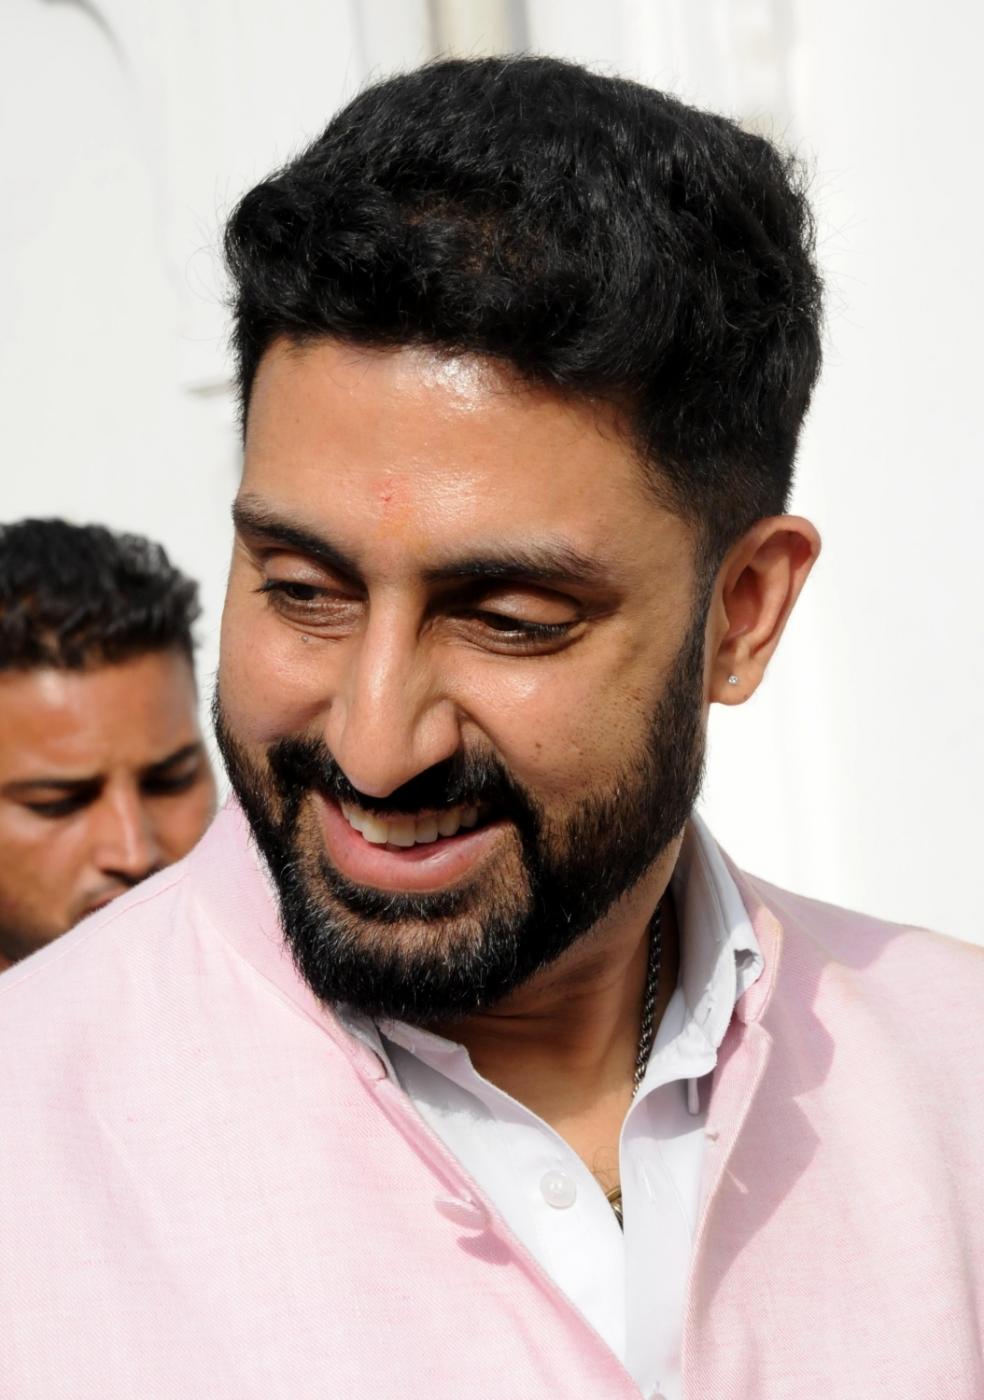 Amritsar: Actor Abhishek Bachchan pays obeisance at the Golden Temple in Amritsar on Aug 26, 2018. (Photo: IANS) by .